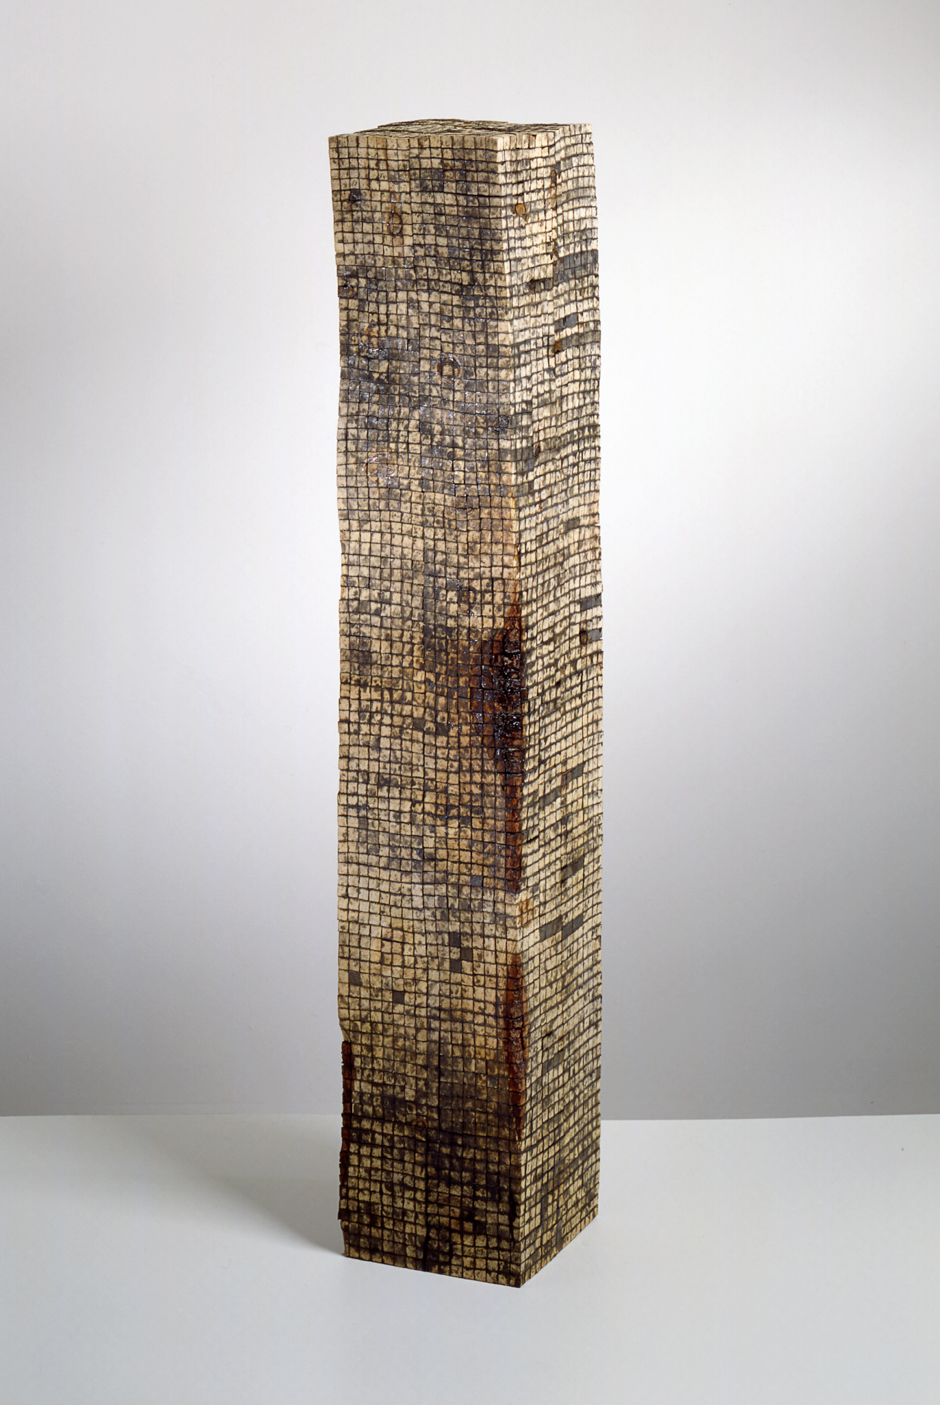 Image of floor standing "Cubed II" sculpture created from wood bandsawn and reassembled with graphite and epoxy